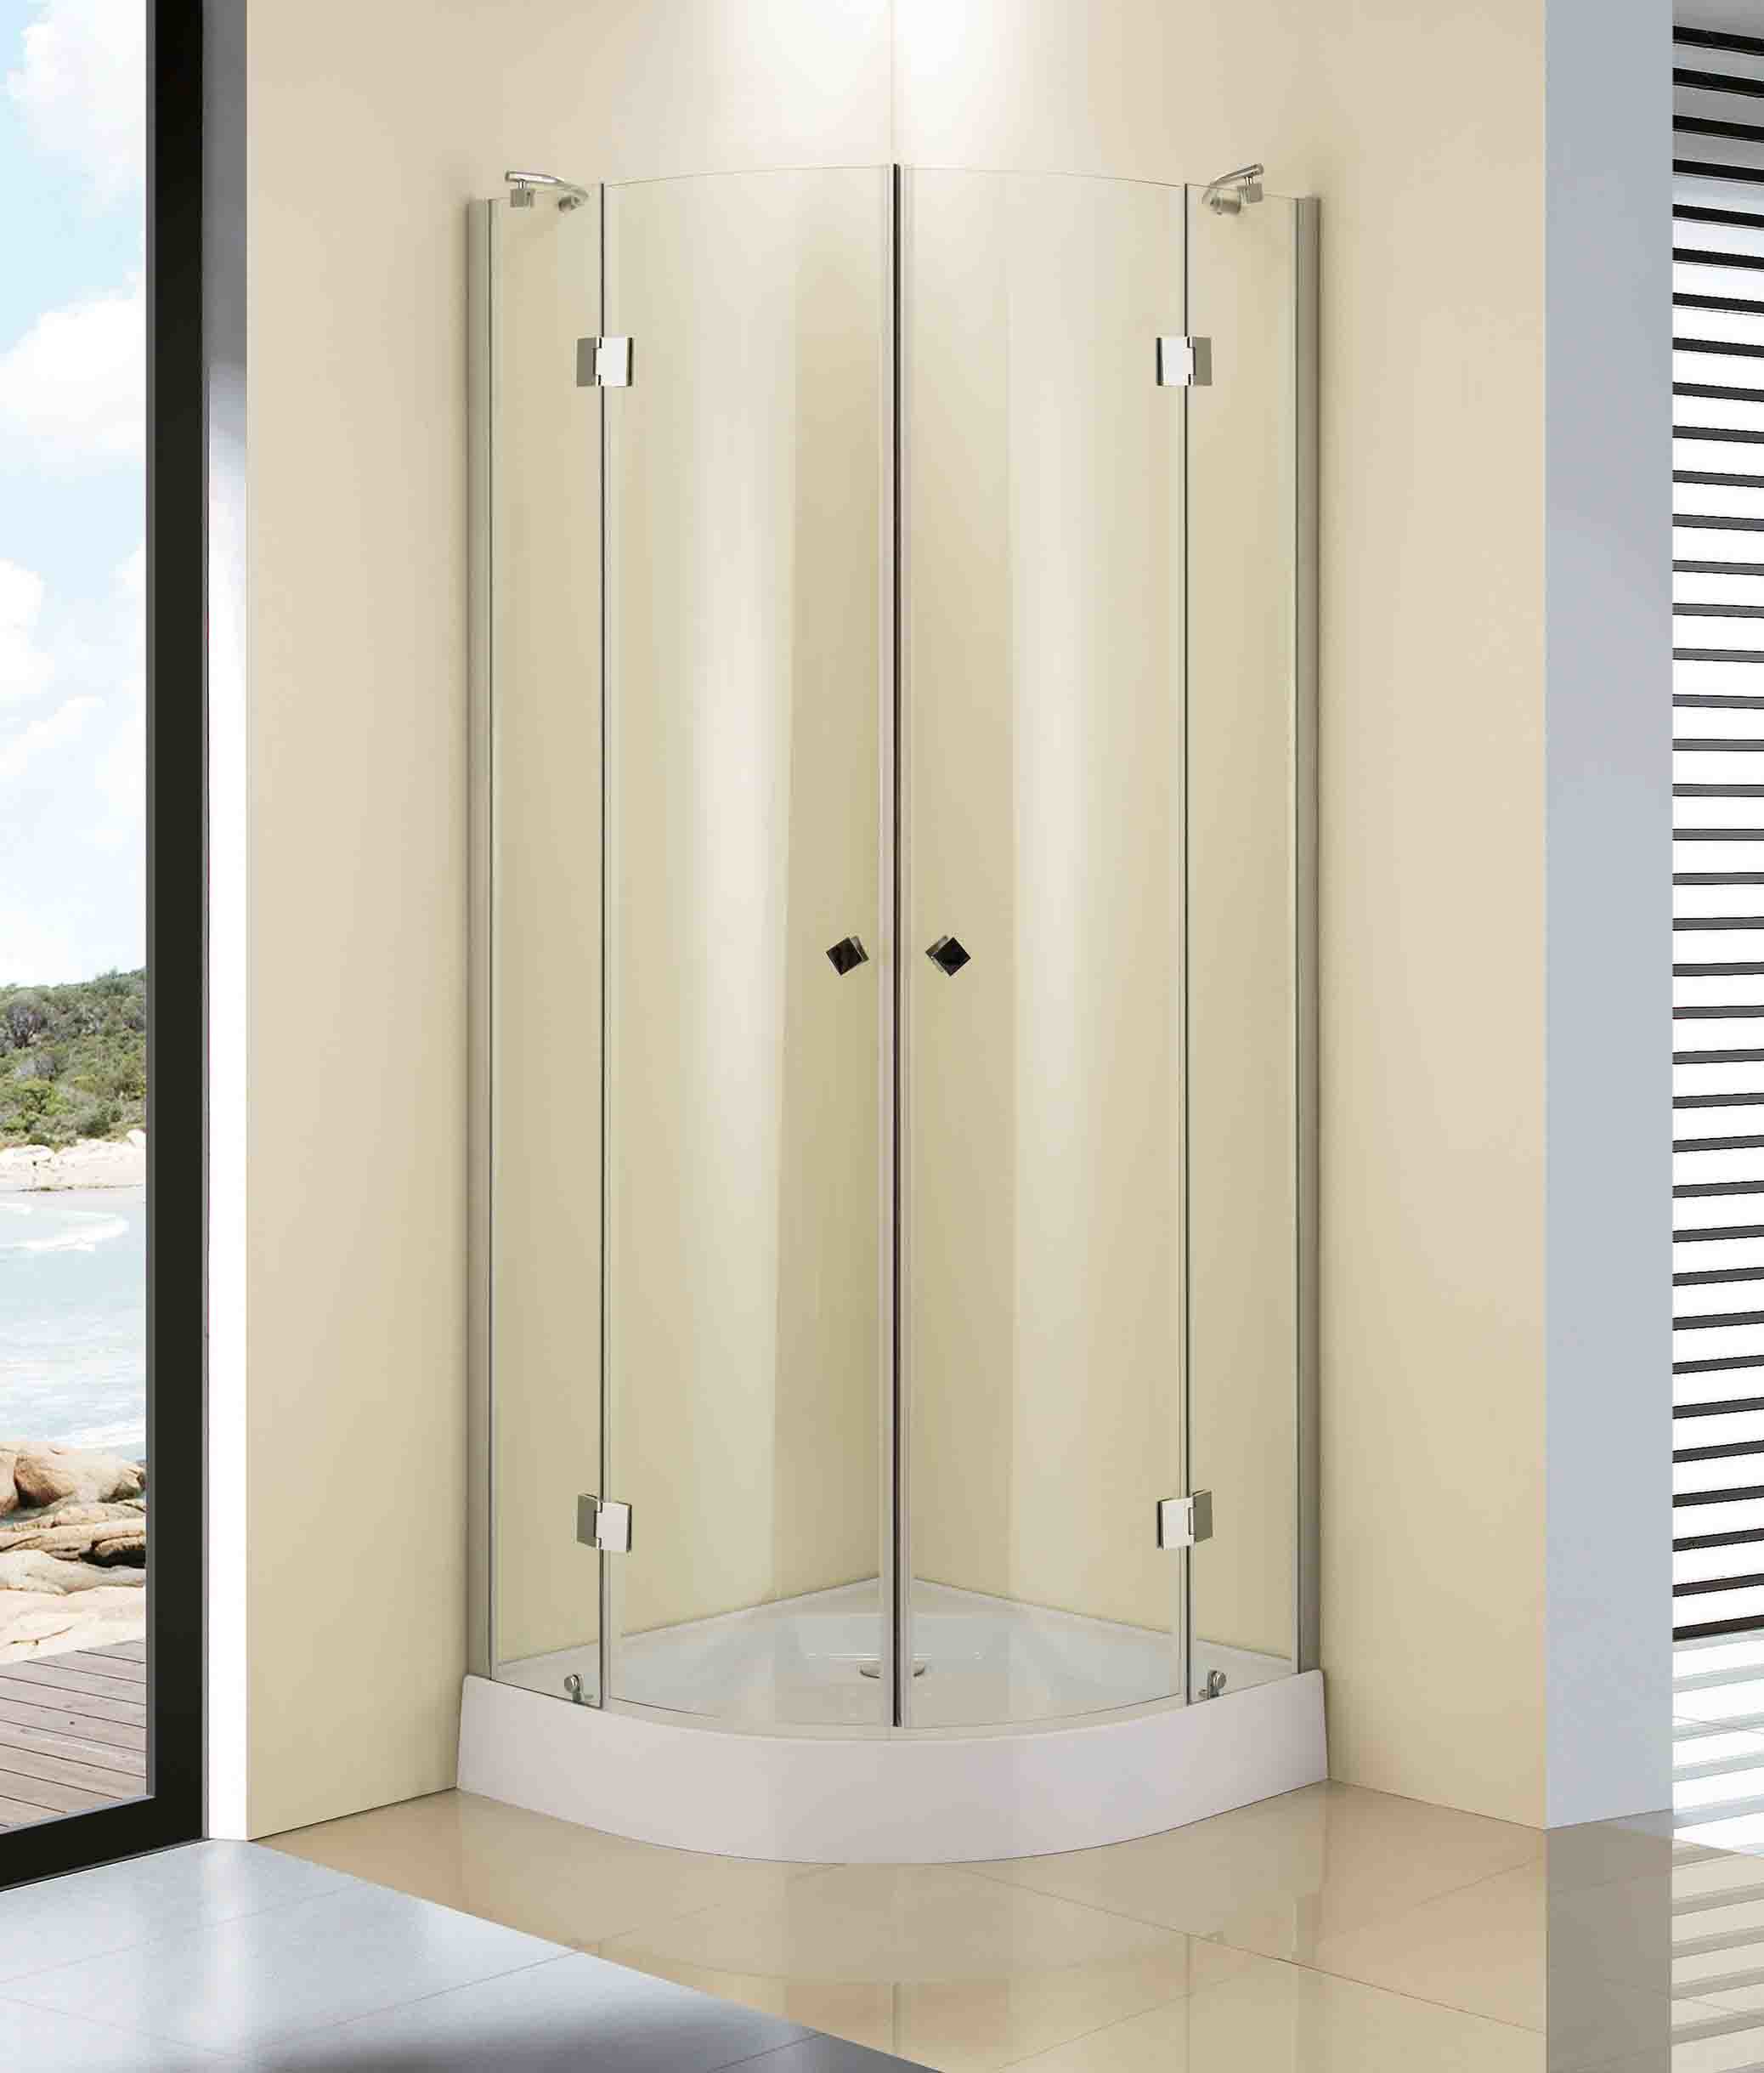 The Hot-Sale Shower Box Tl-565